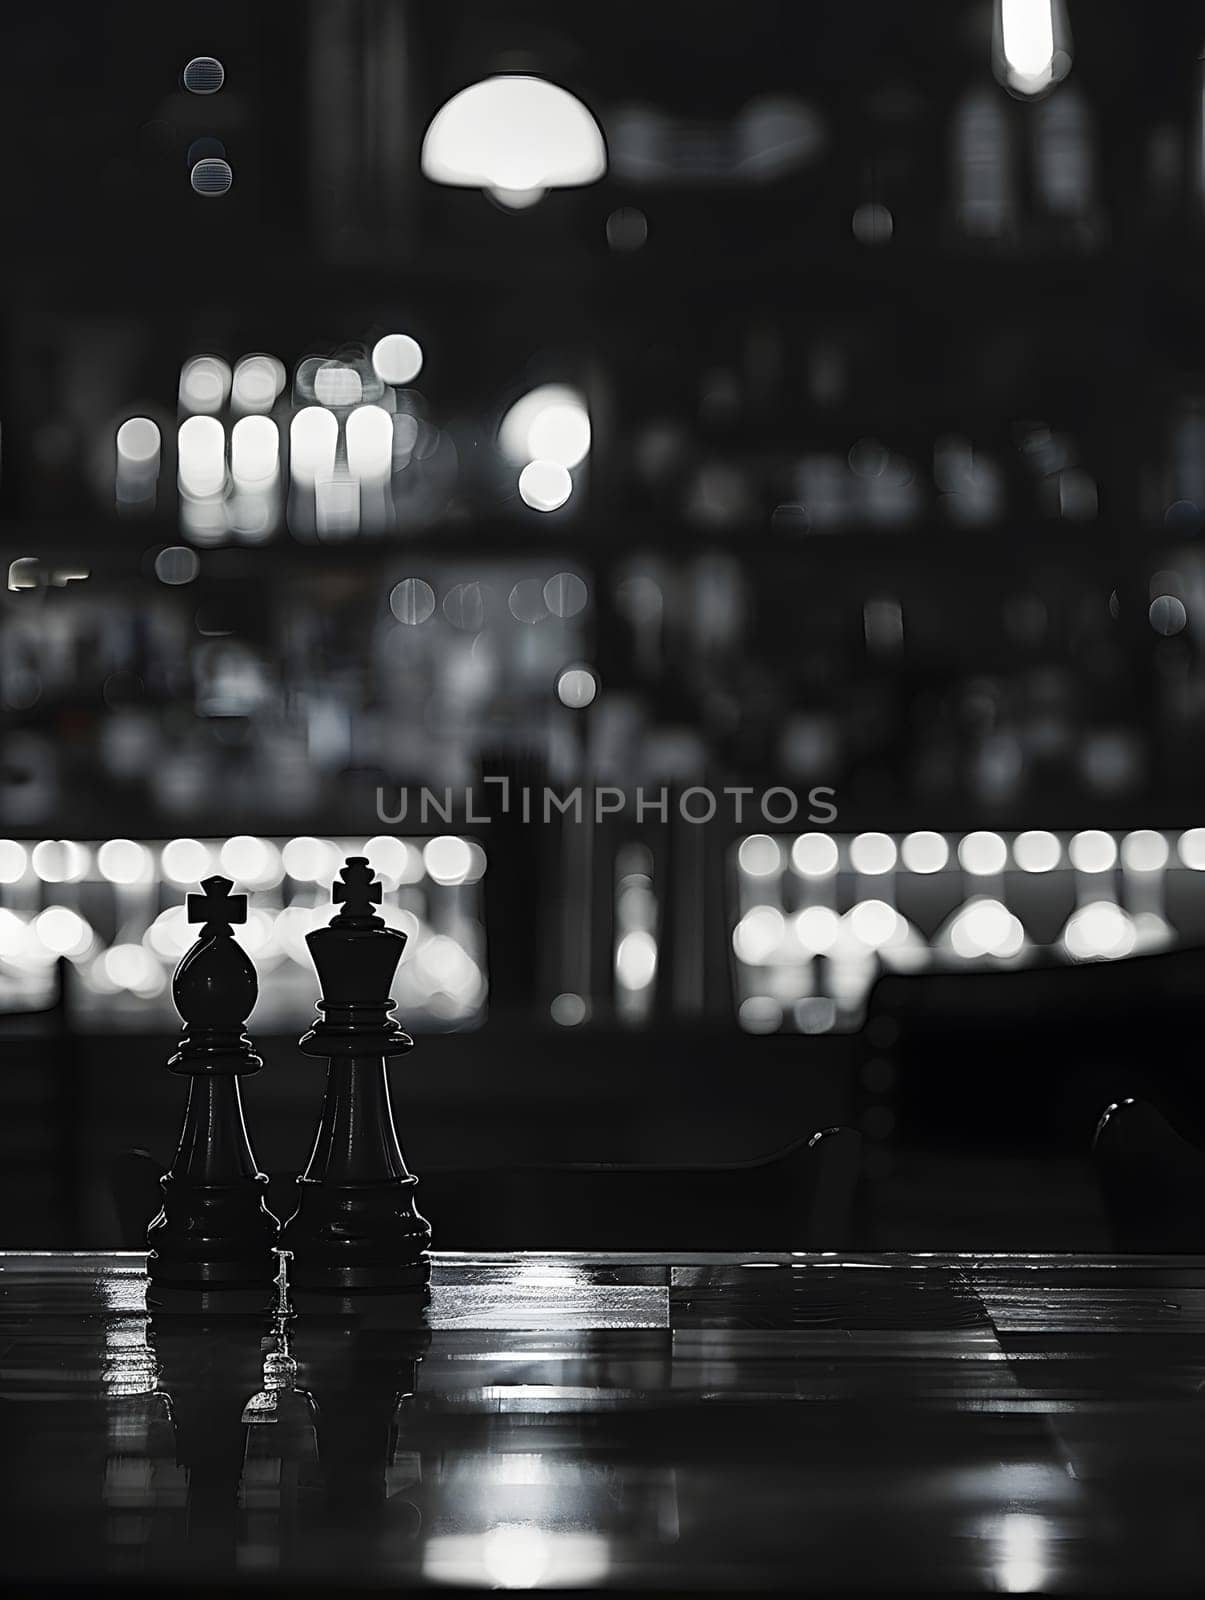 Monochrome photo of two chess pieces on a board, with black and white contrast by Nadtochiy